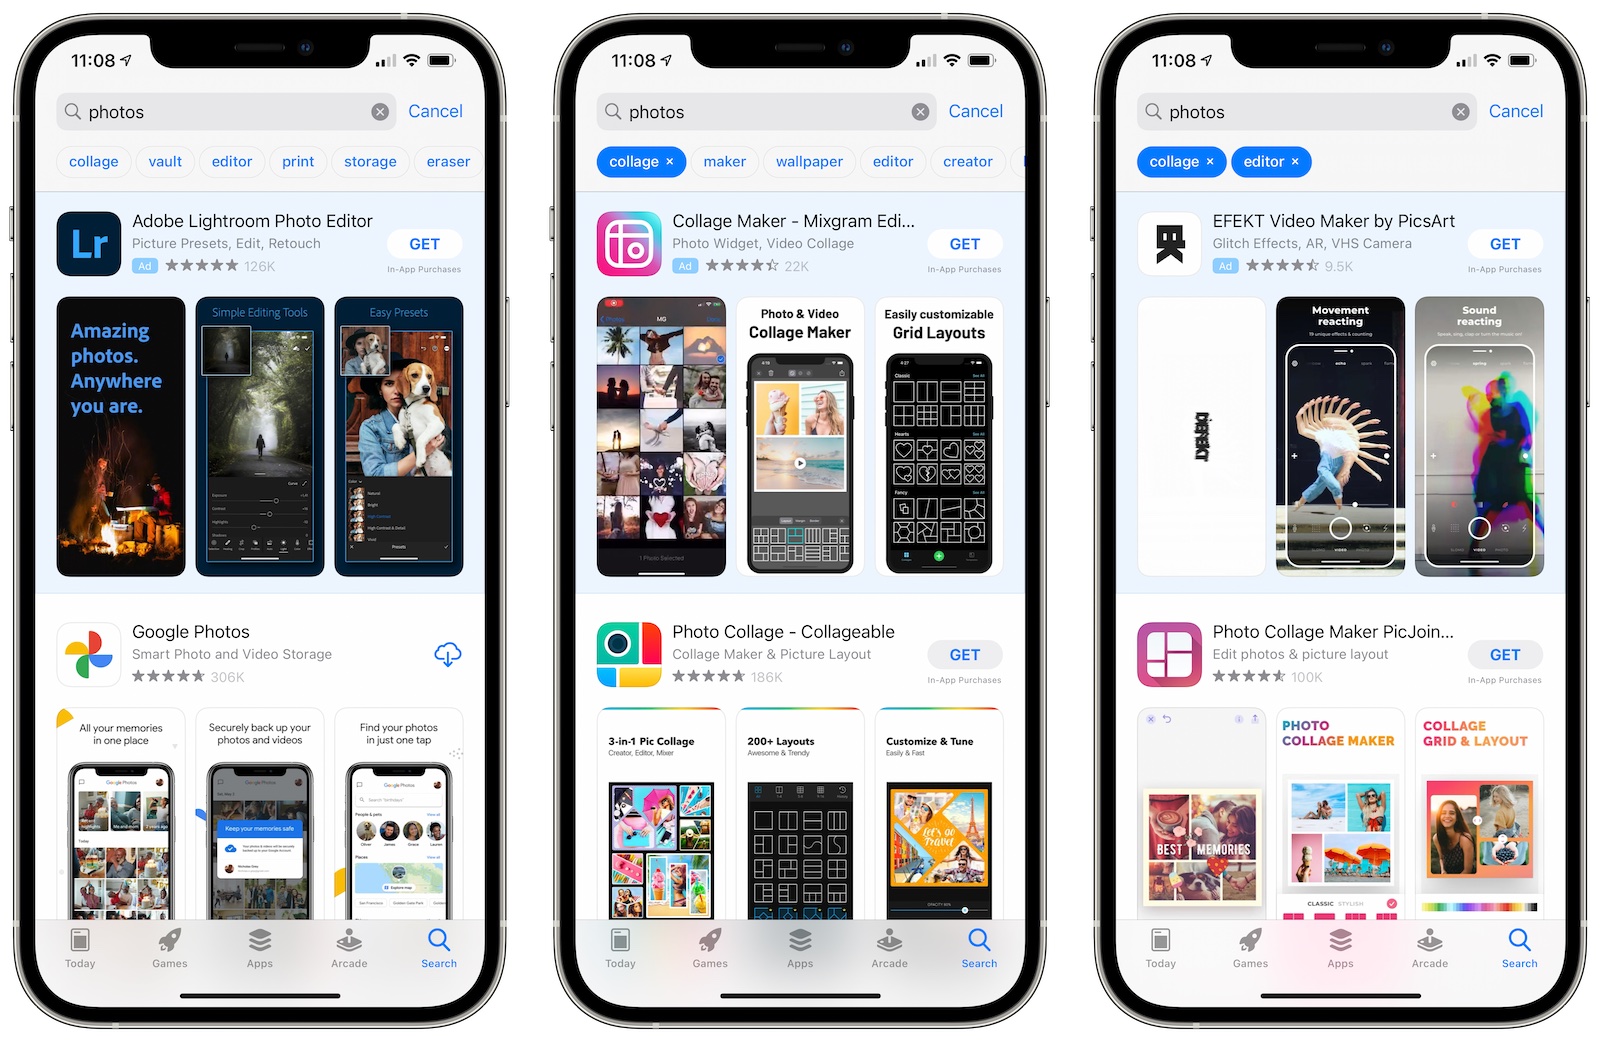 App Store Now Offers Search Suggestions | MacRumors Forums